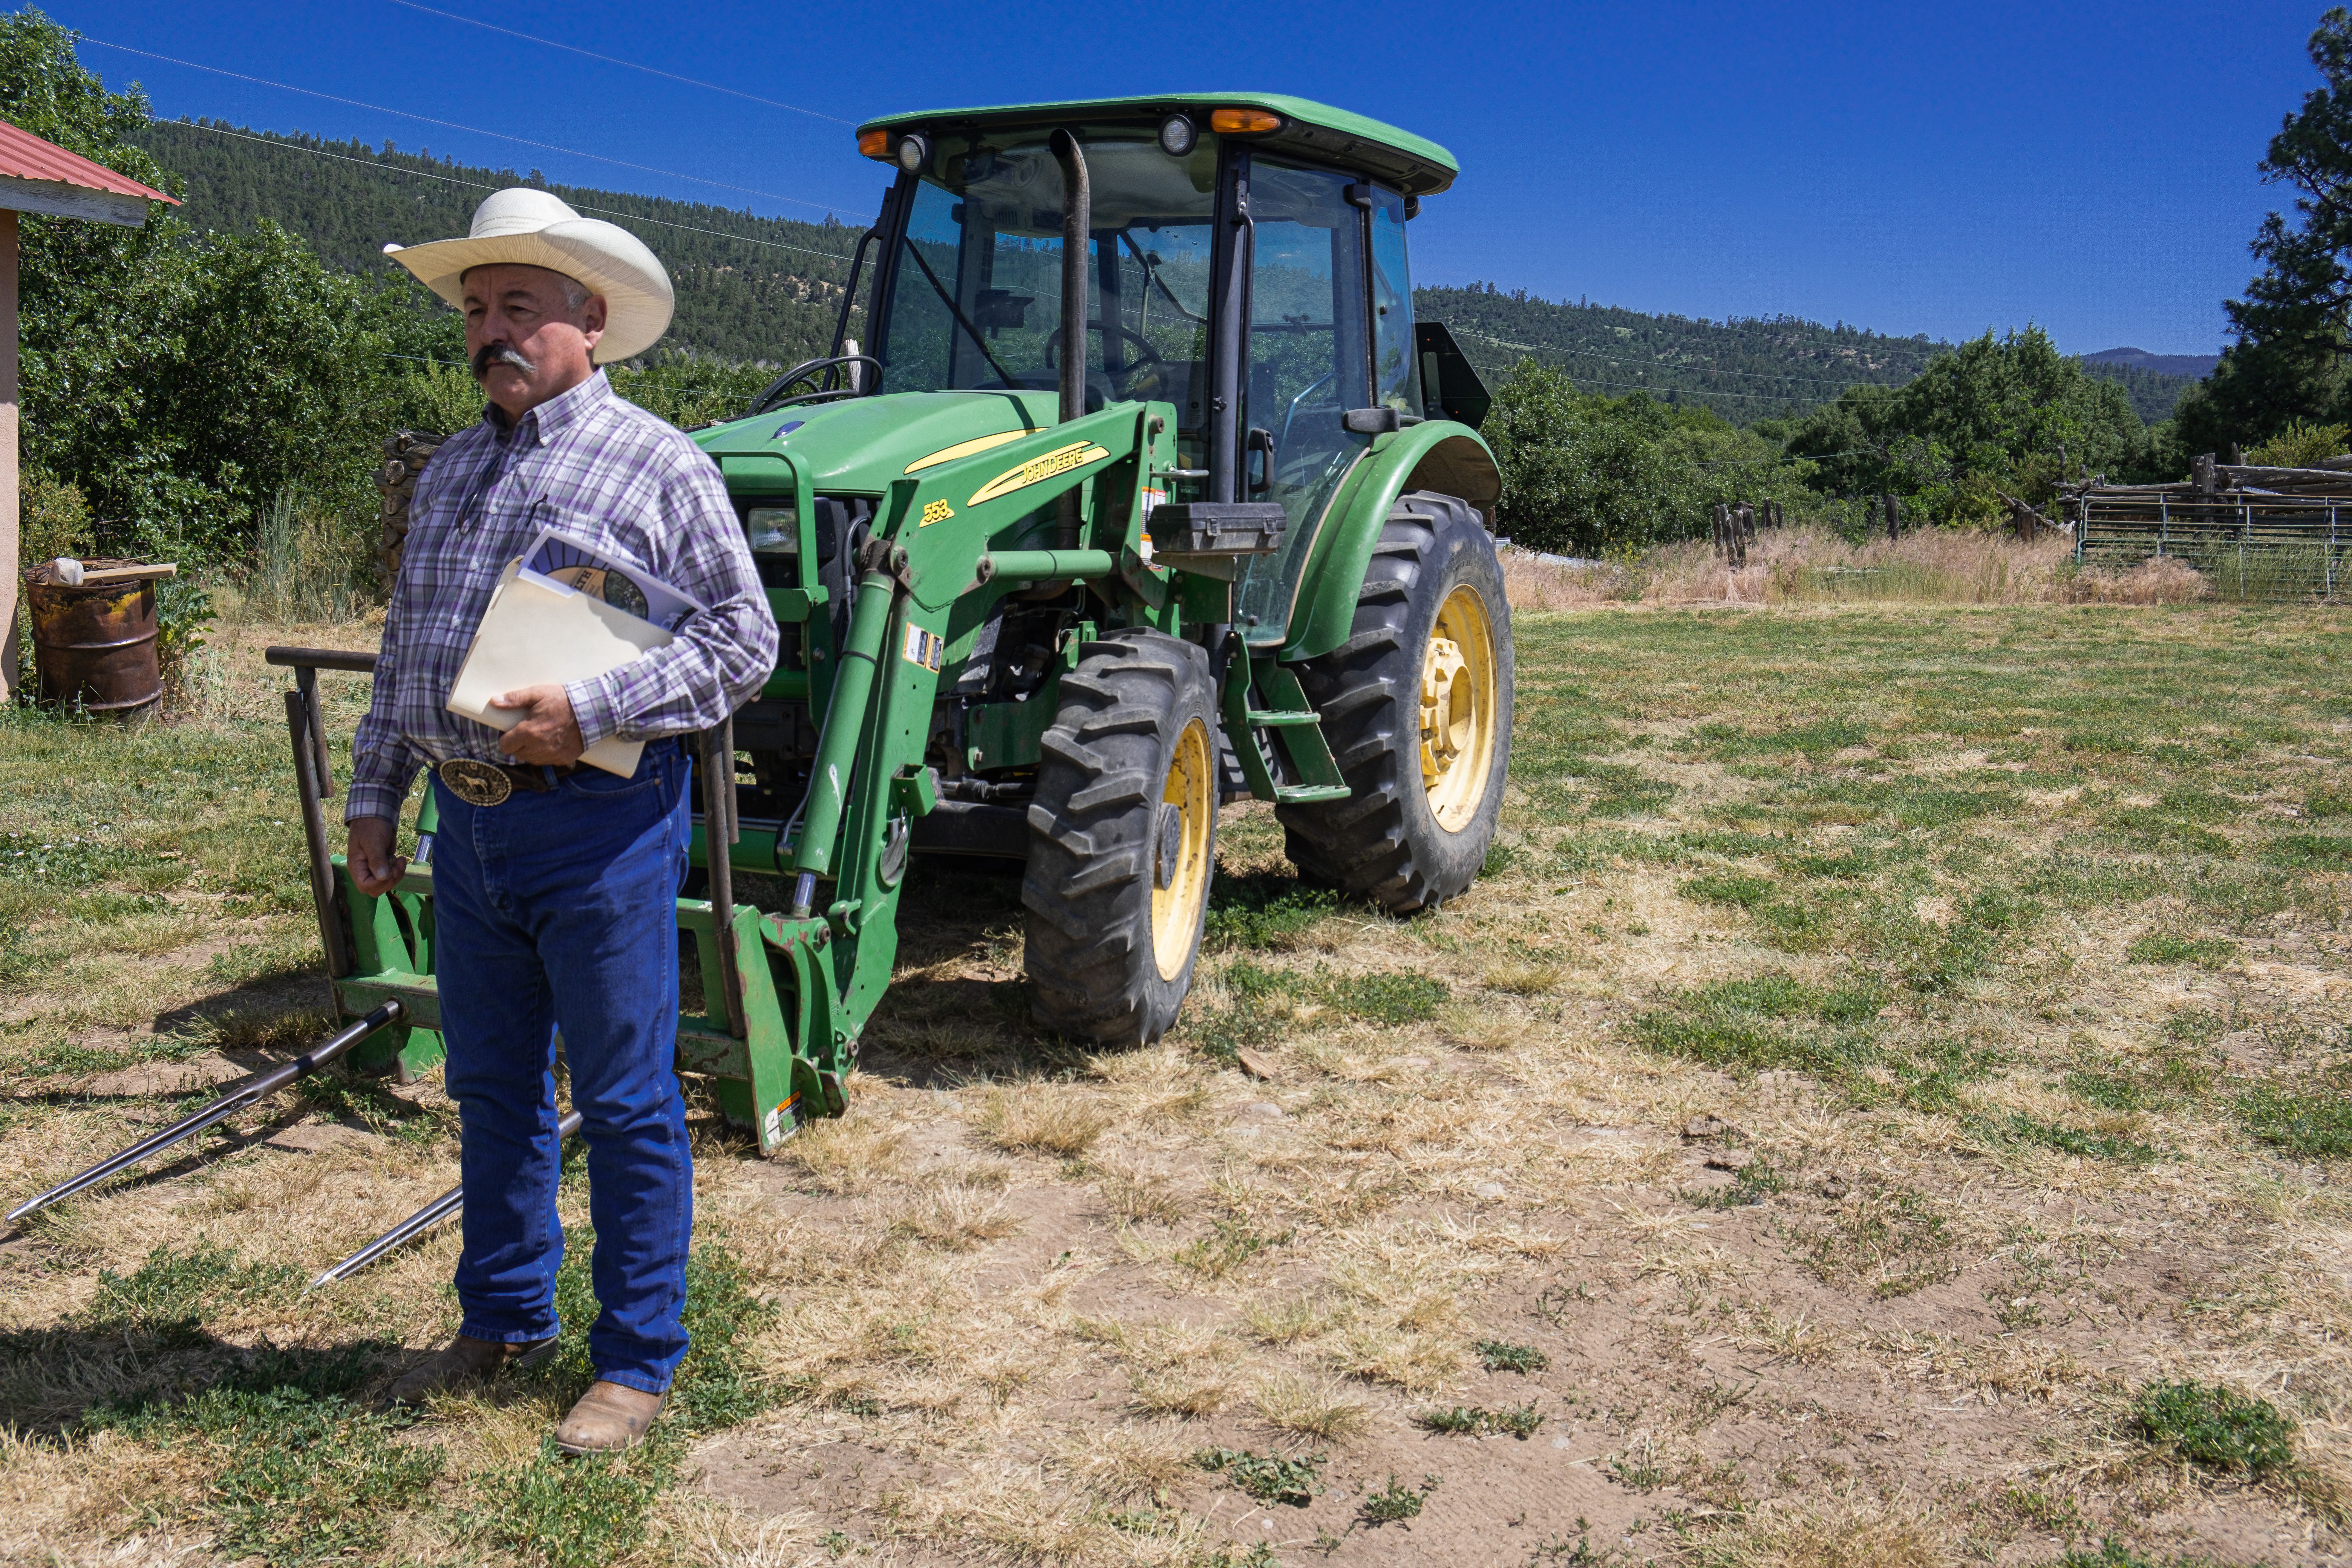 New Mexico rancher David Sanchez in Canjilon, New Mexico, in front of a tractor.